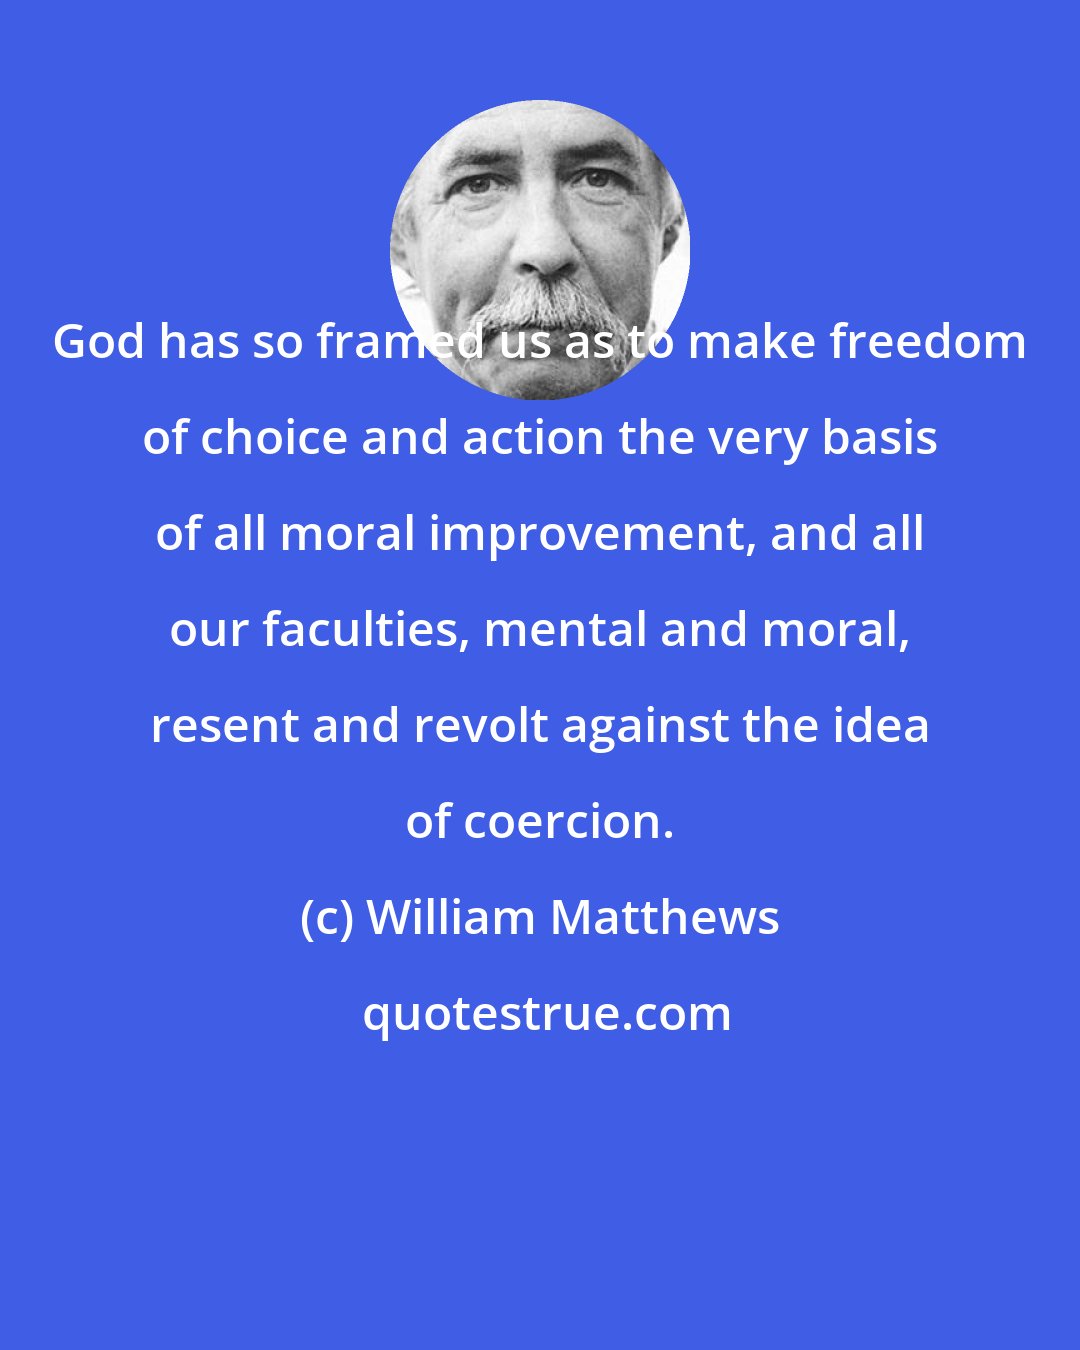 William Matthews: God has so framed us as to make freedom of choice and action the very basis of all moral improvement, and all our faculties, mental and moral, resent and revolt against the idea of coercion.